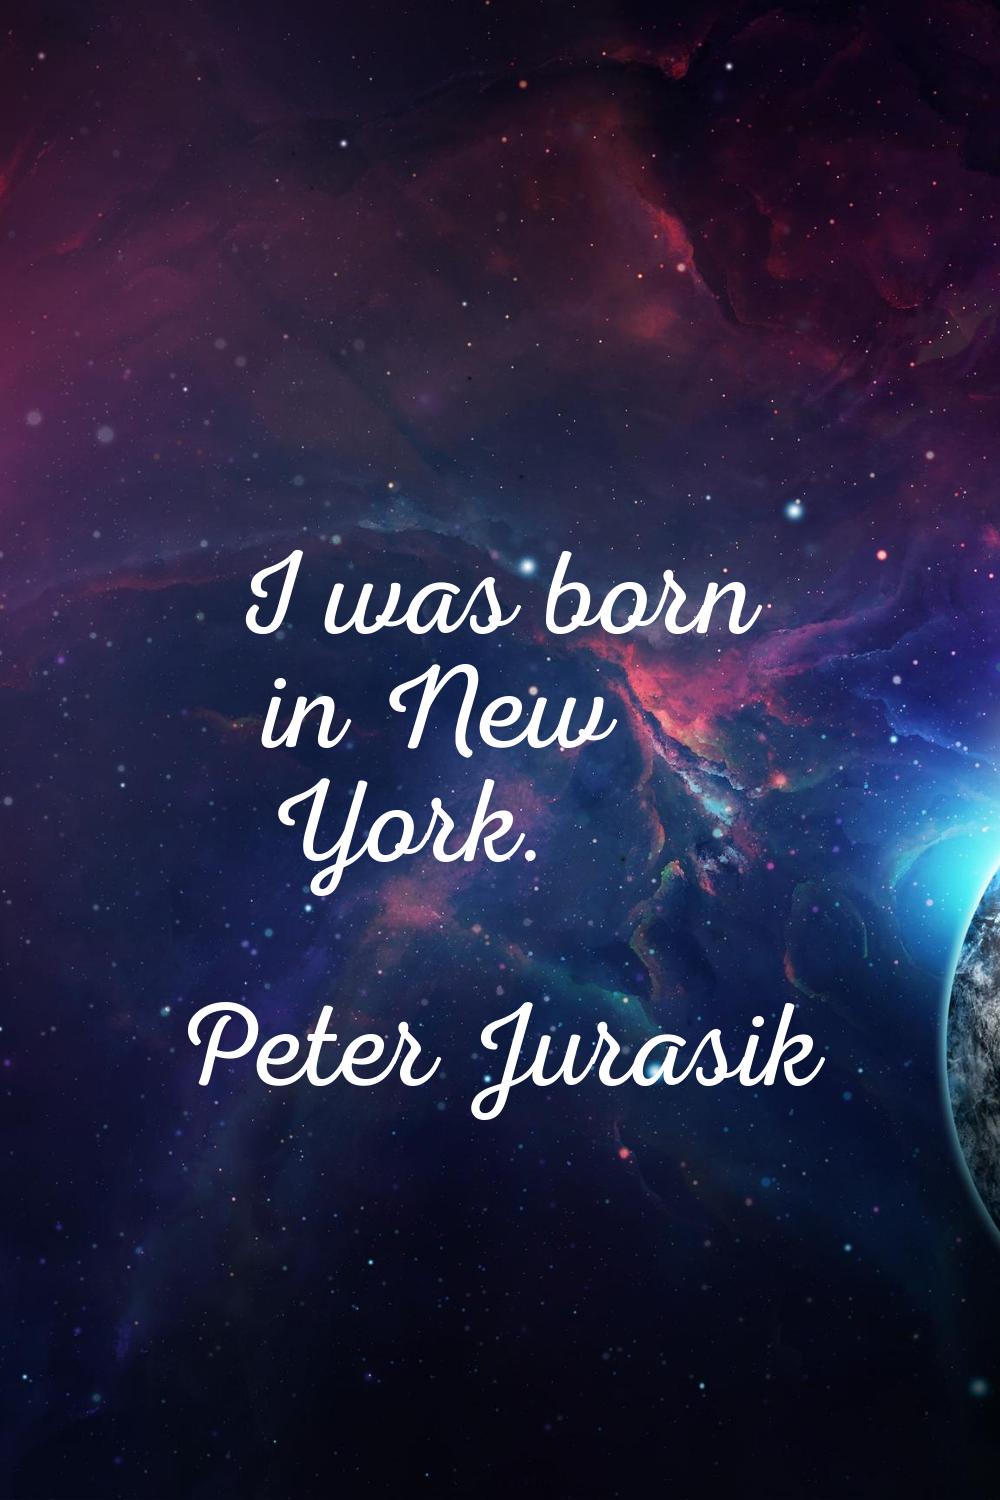 I was born in New York.